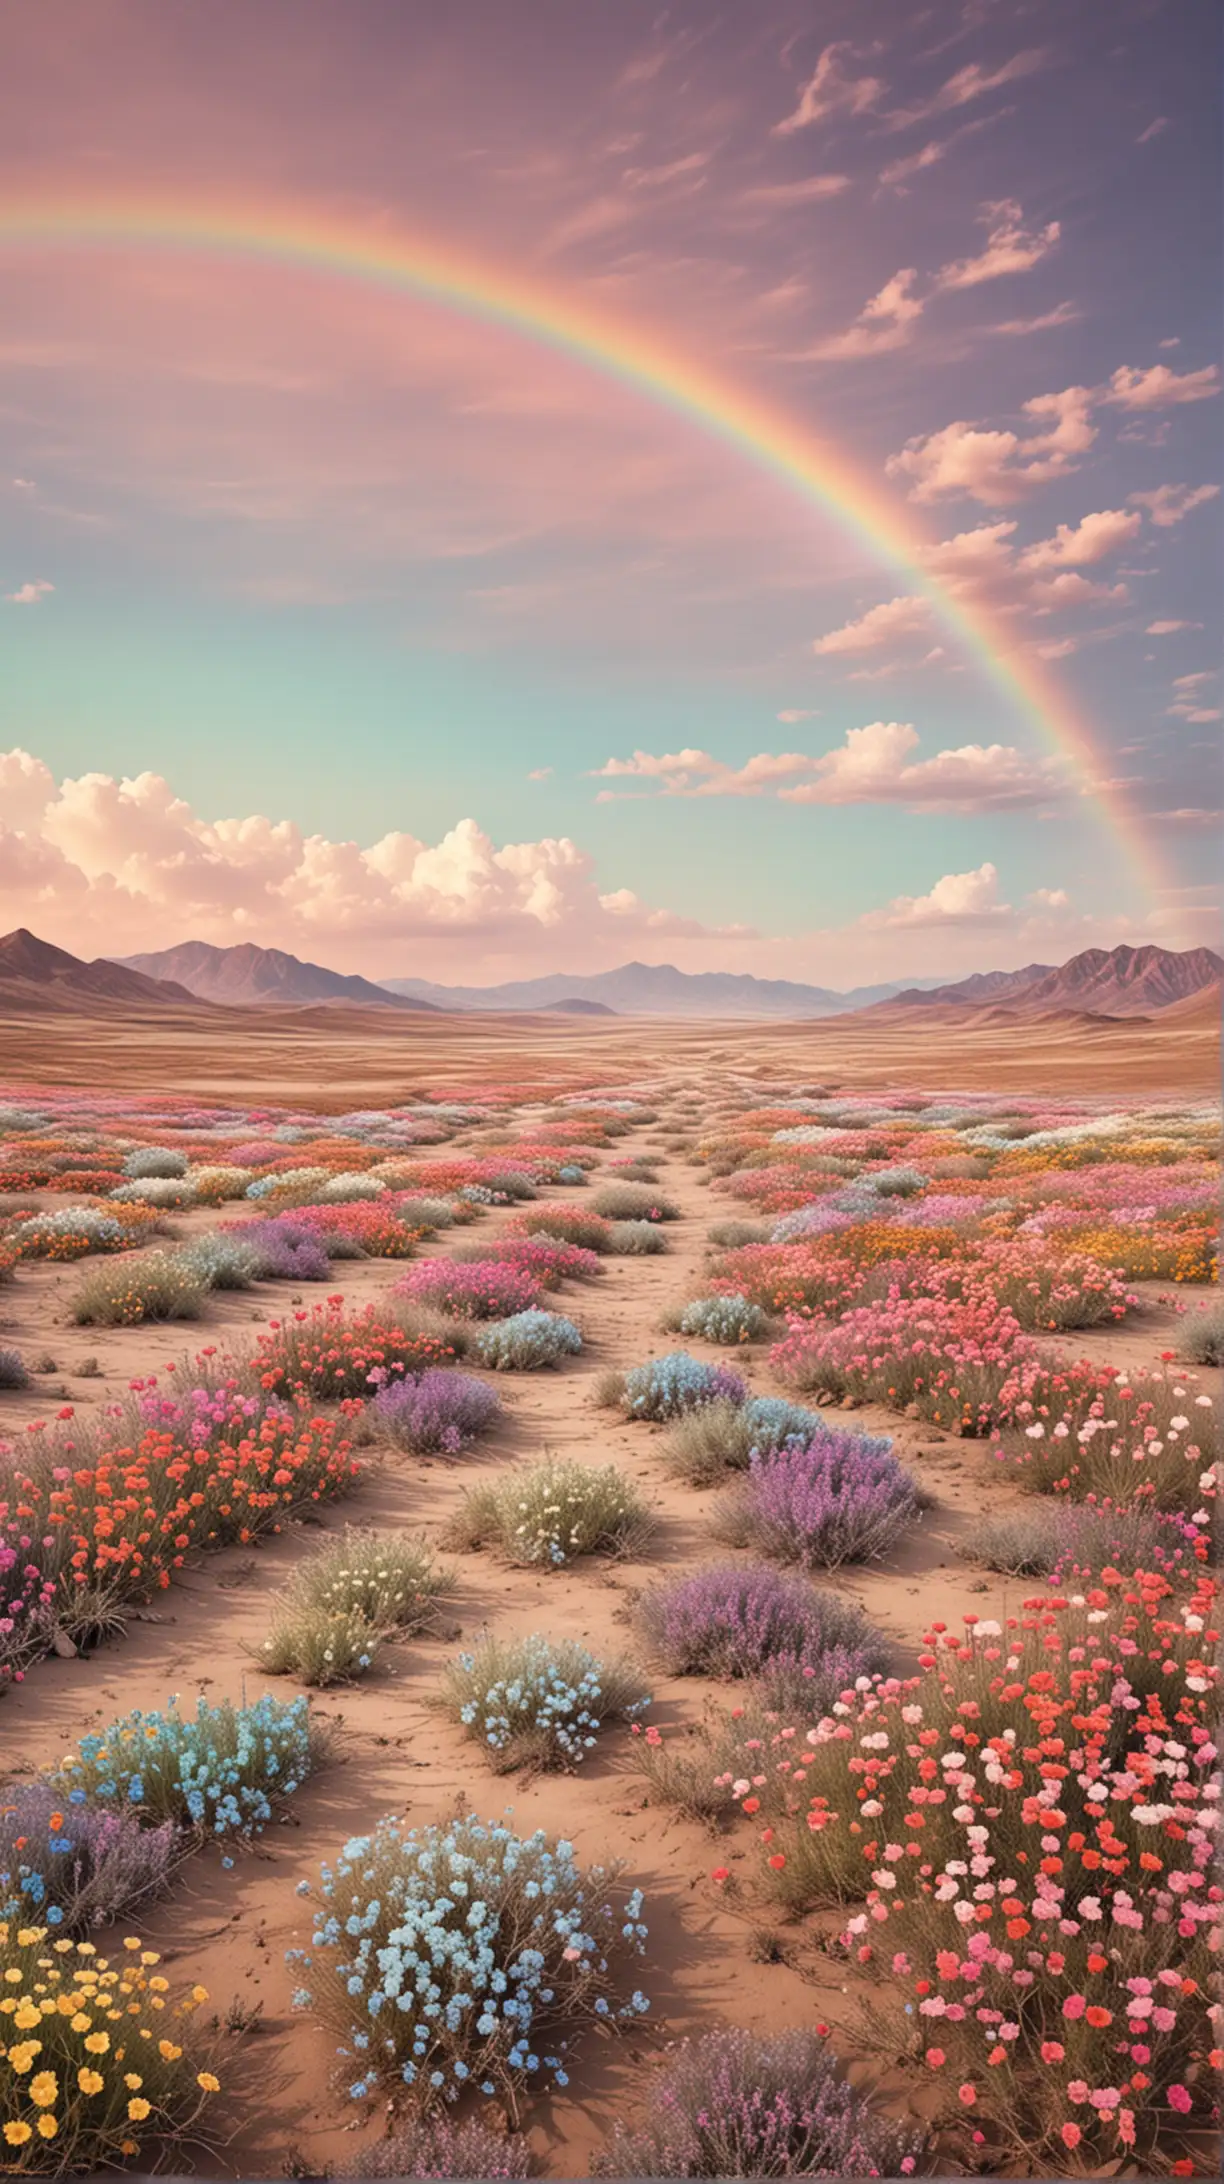 Contrast of Desert and Rainbow Flower Field Journey from Dark to Bright